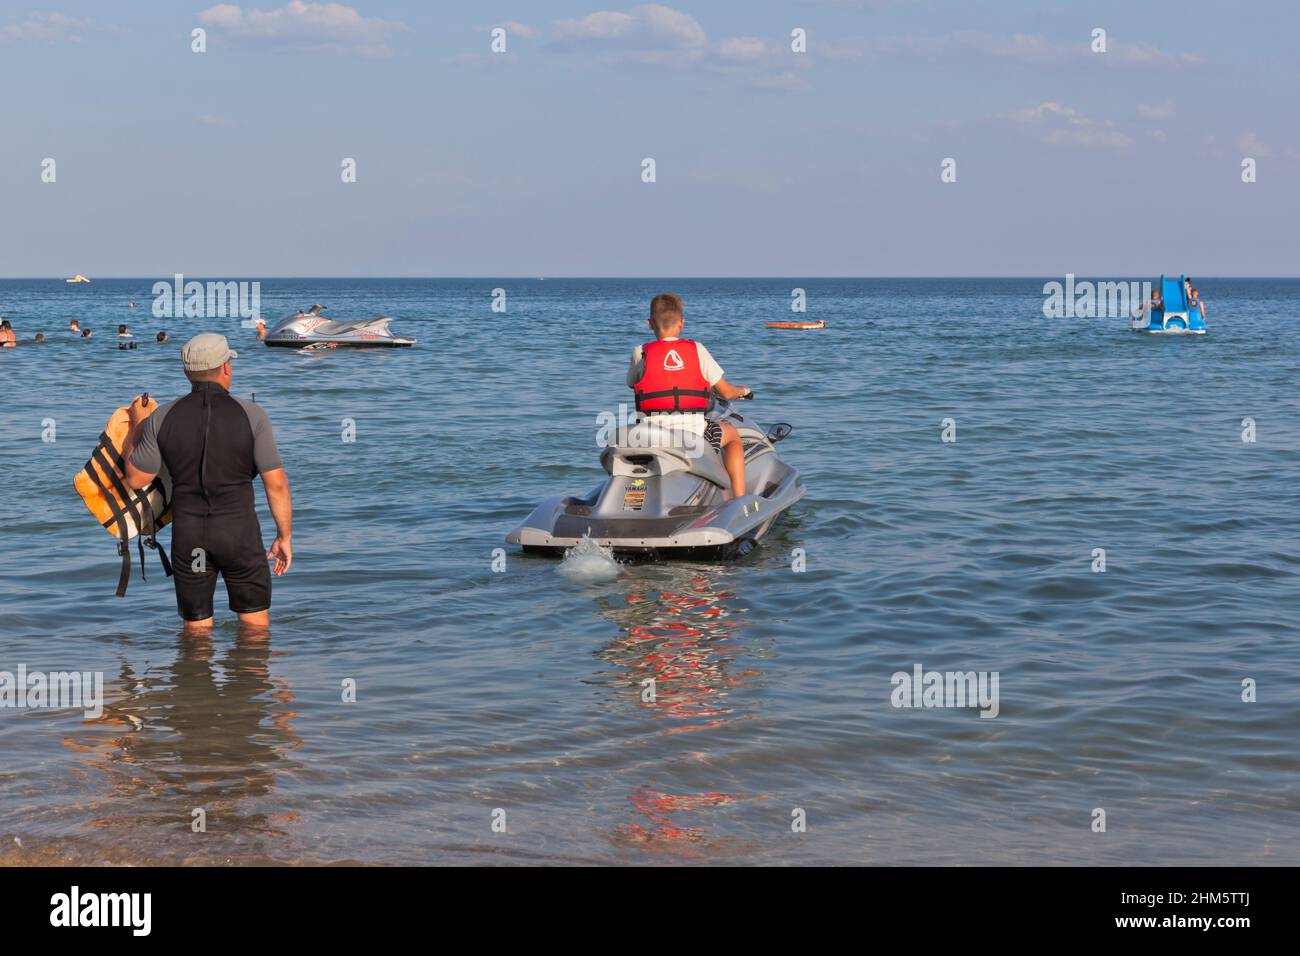 village Zaozernoe, Evpatoria, Crimea, Russia - July 18, 2021: A boy under the supervision of an instructor drives off on a jet ski from the Super Aqua Stock Photo